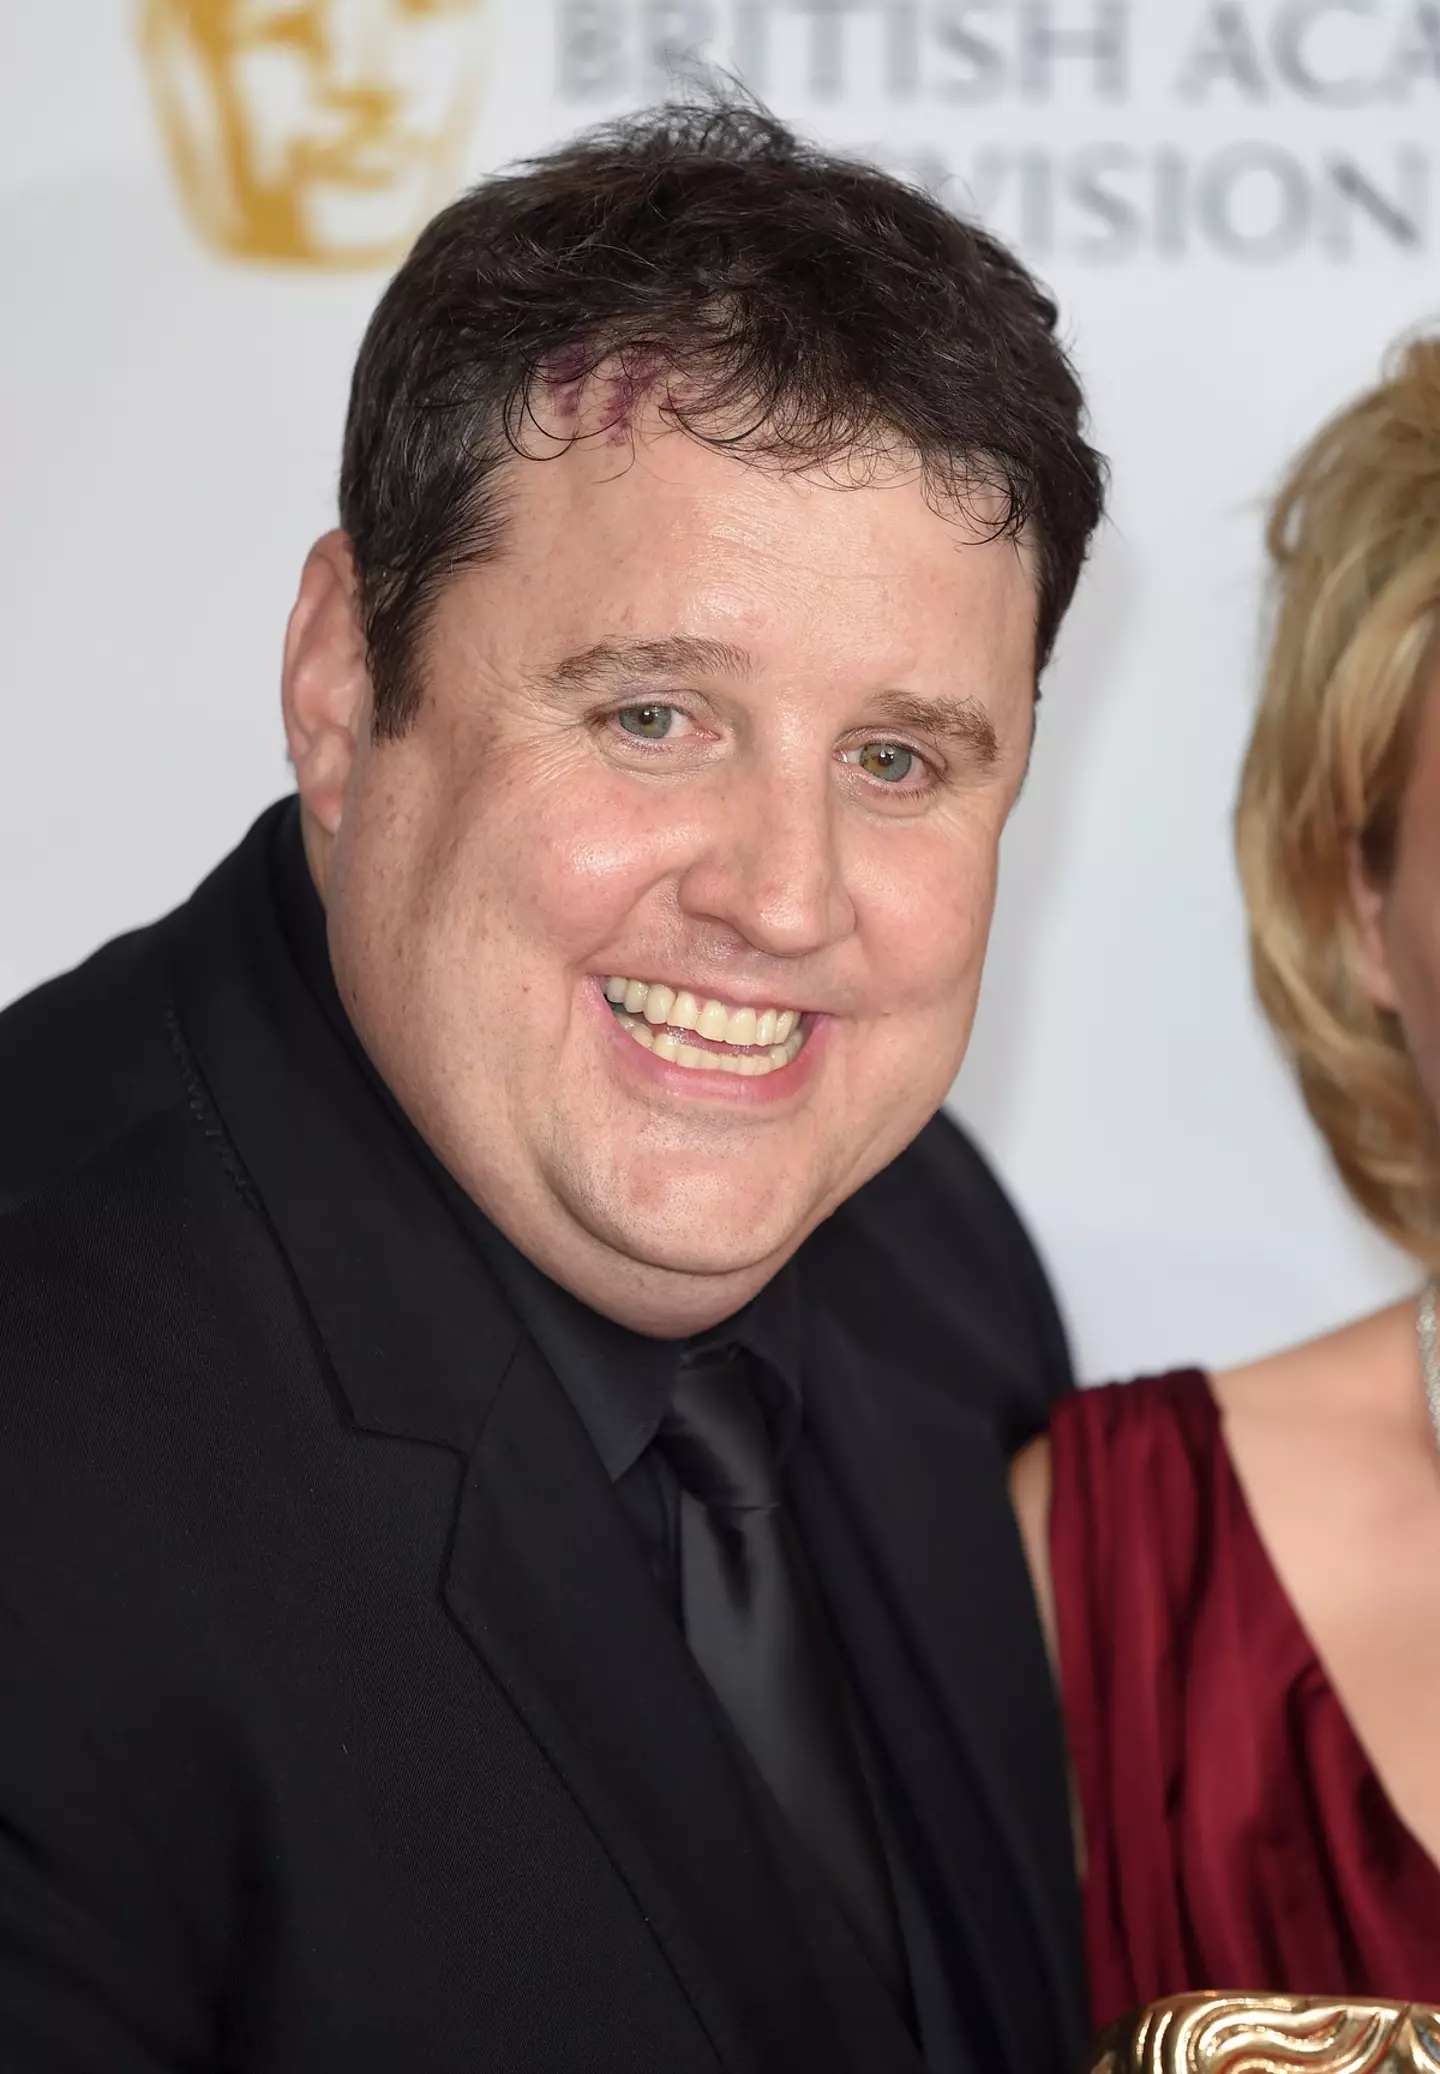 Peter Kay has defended the roles of Matt Lucas and David Walliams in Little Britain.